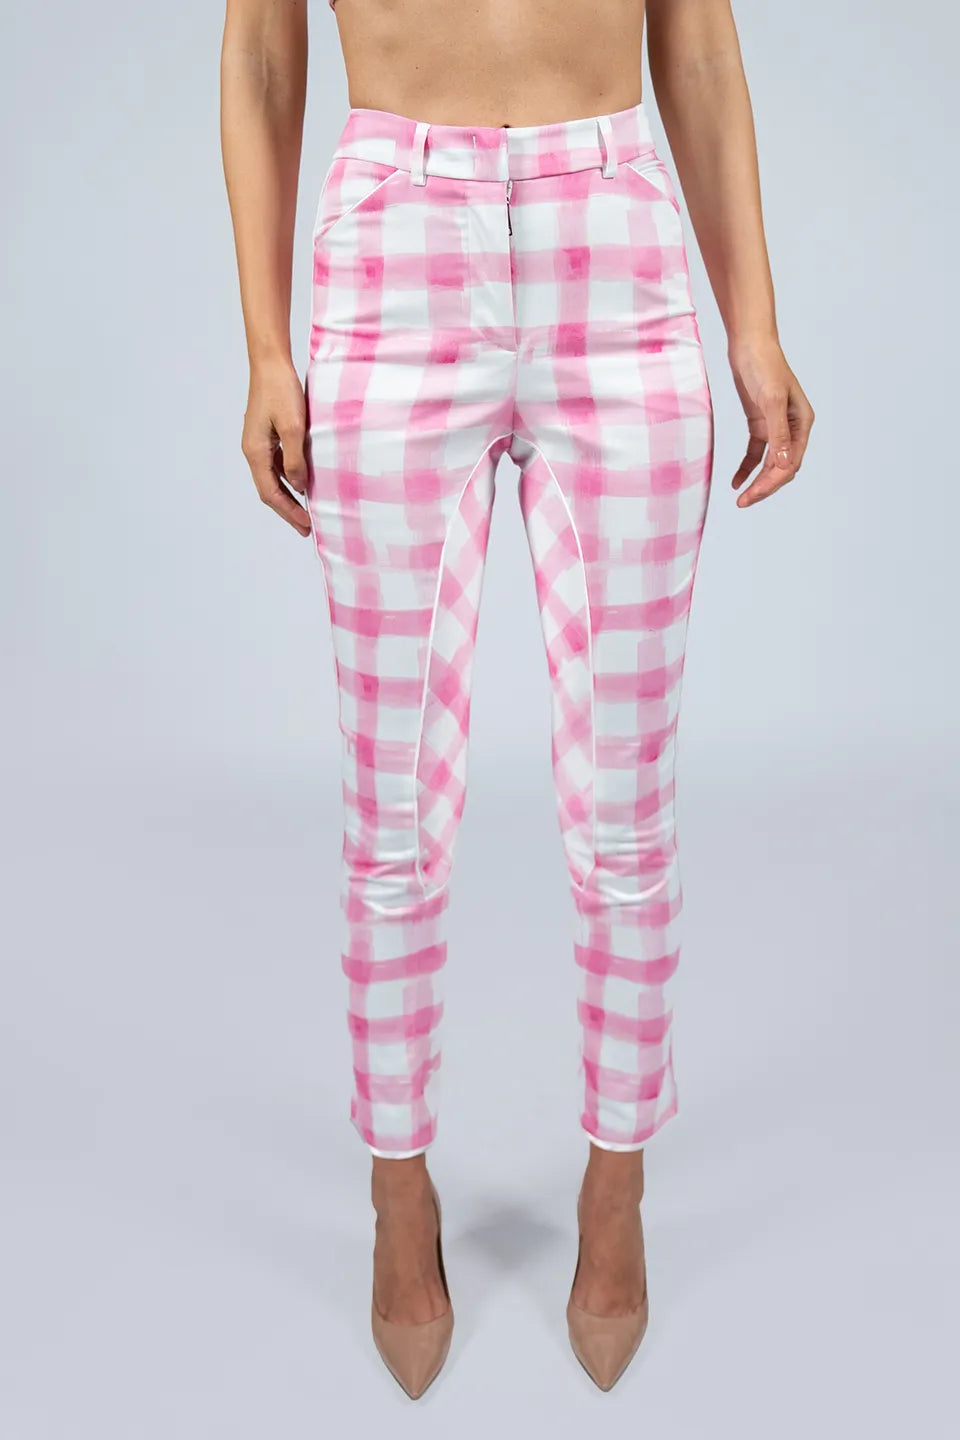 Designer Pink Women pants, shop online with free delivery in UAE. Product gallery 3